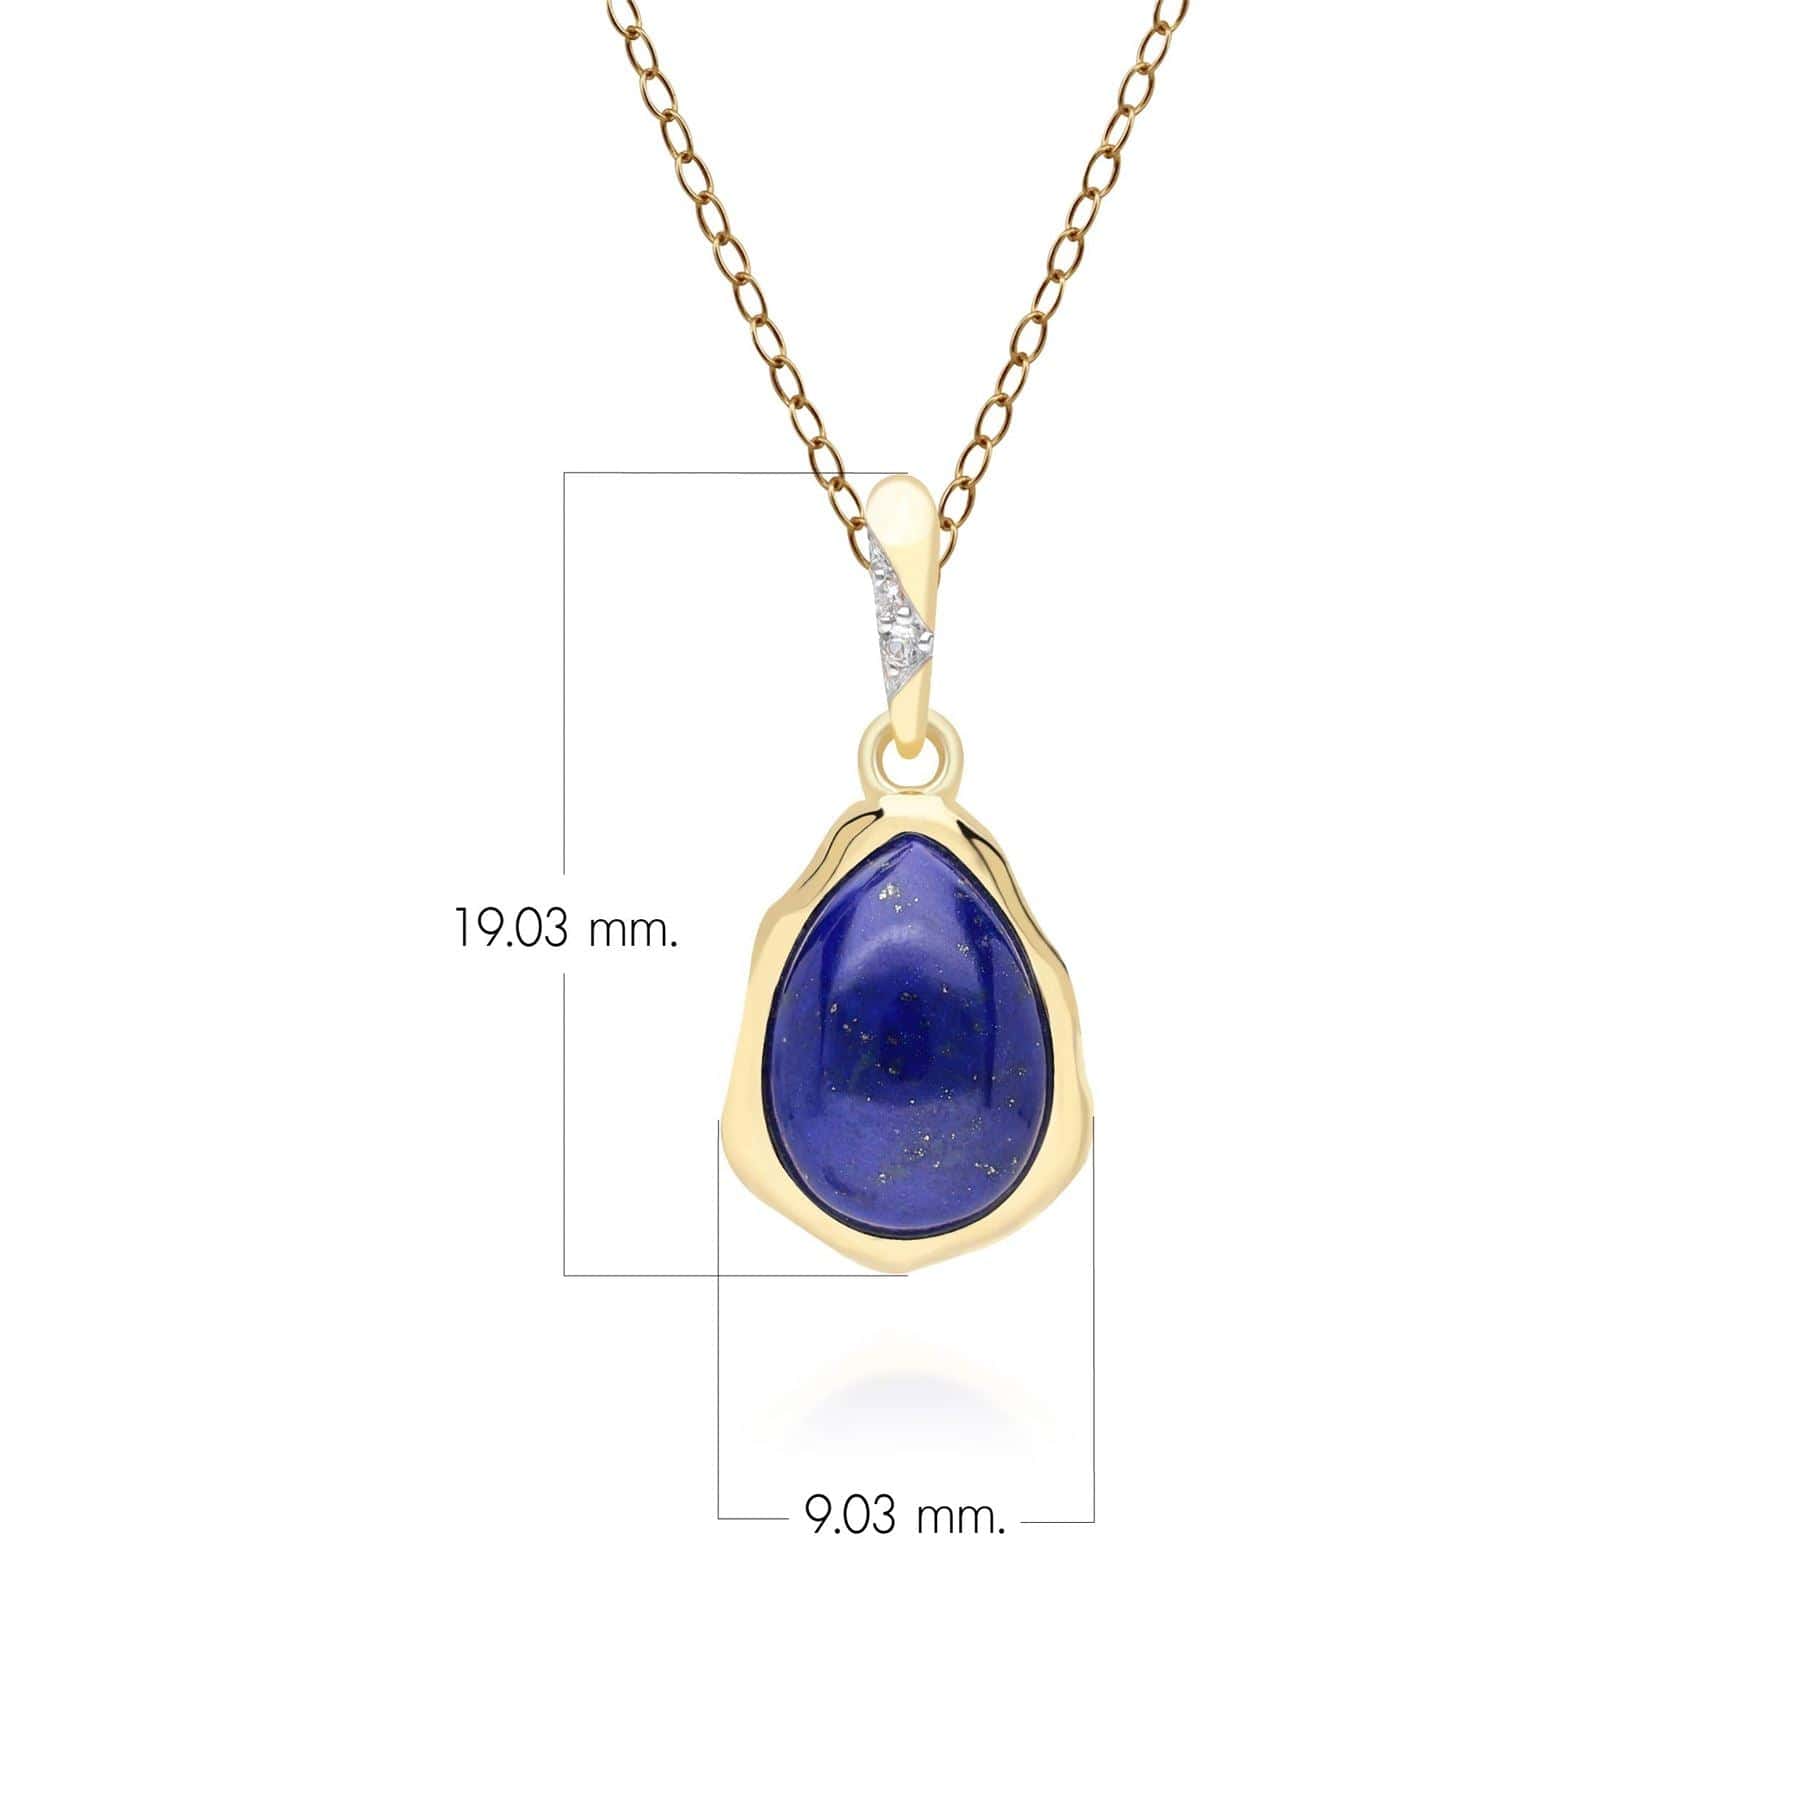 Irregular Lapis Lazuli & Topaz Pendant In 18ct Gold Plated SterlIng Silver